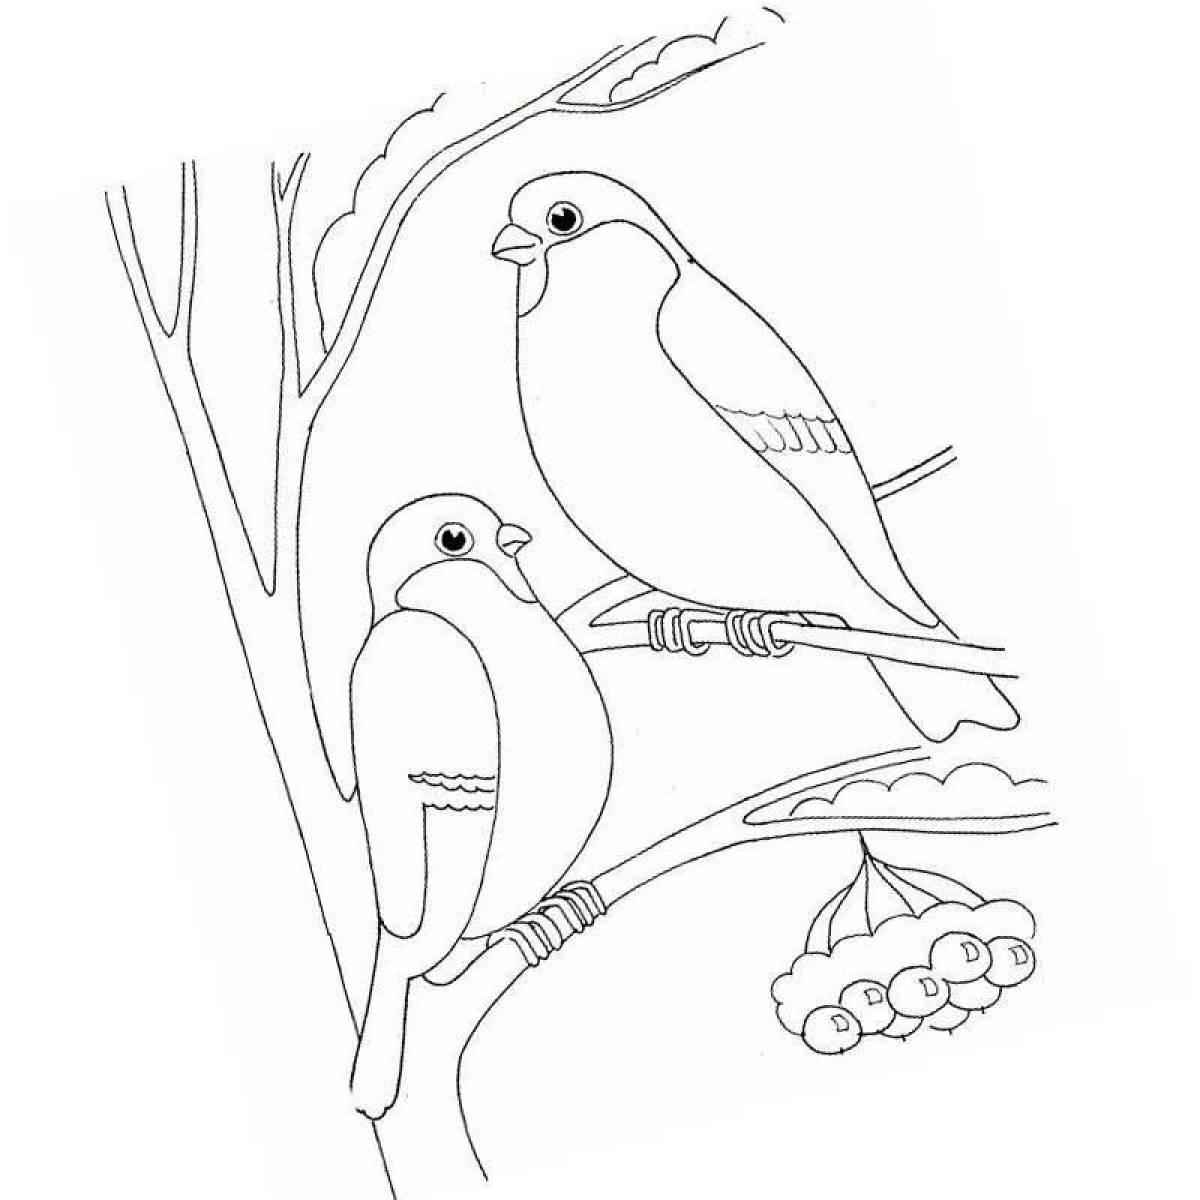 Incredible bird coloring book for 6-7 year olds